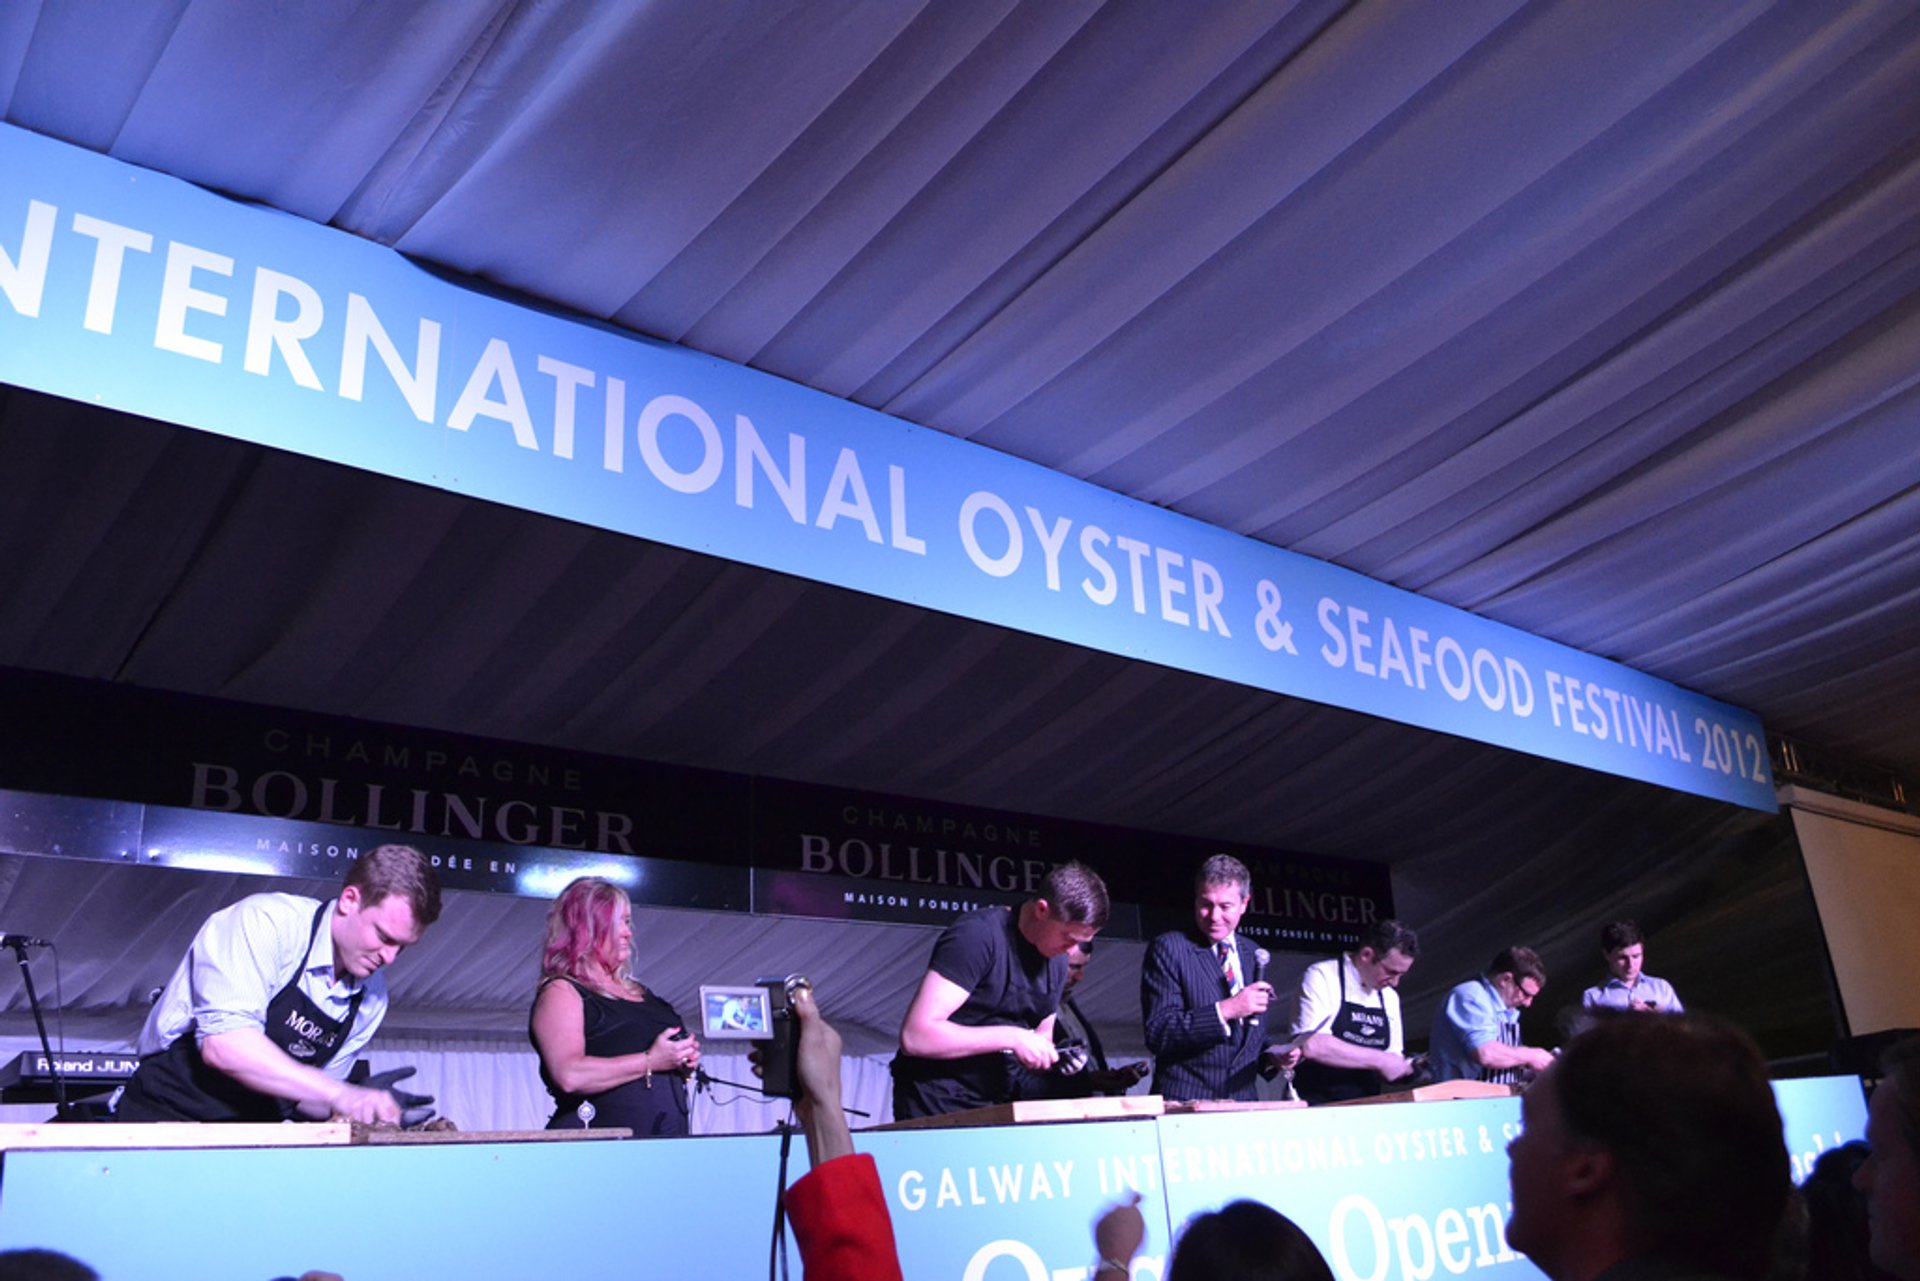 Galway International Oyster & Seafood Festival 2023 in Ireland - Dates